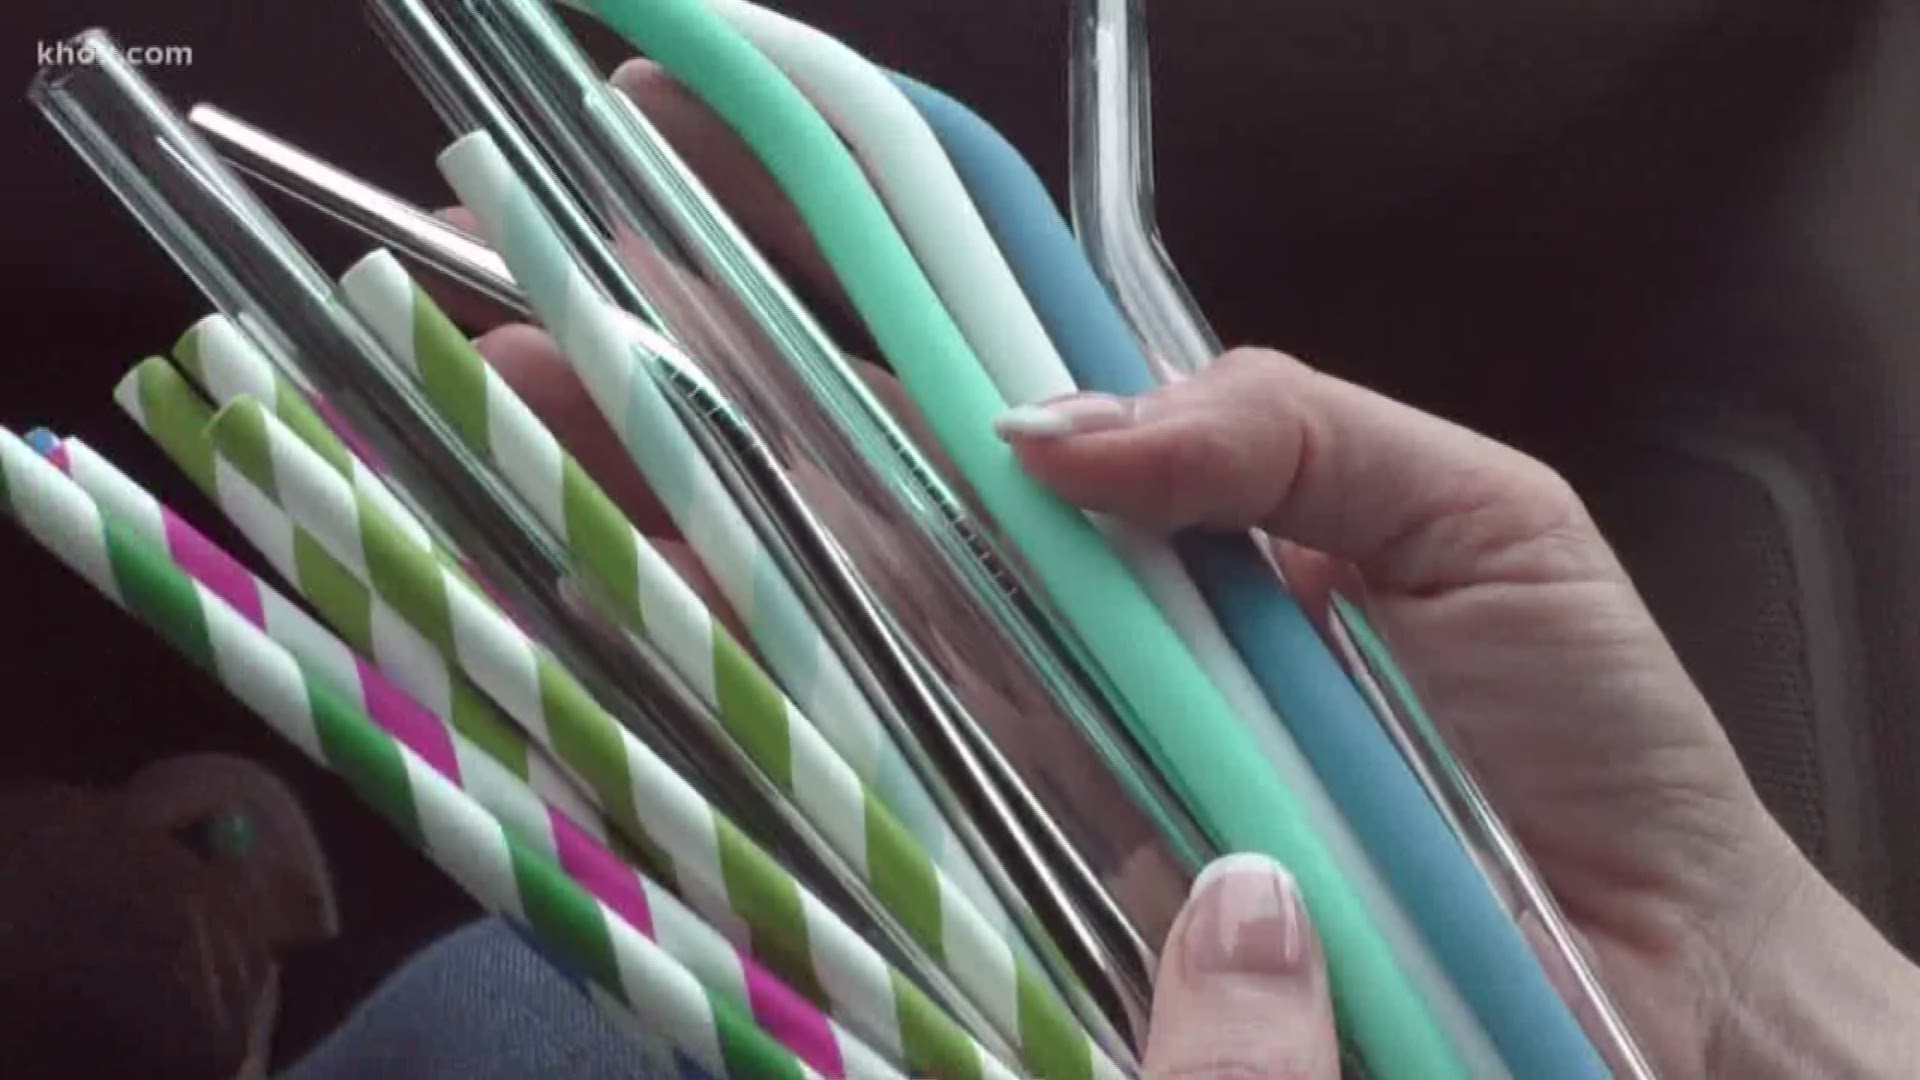 We put four different types of reusable straws to the test to see which one is worth it.